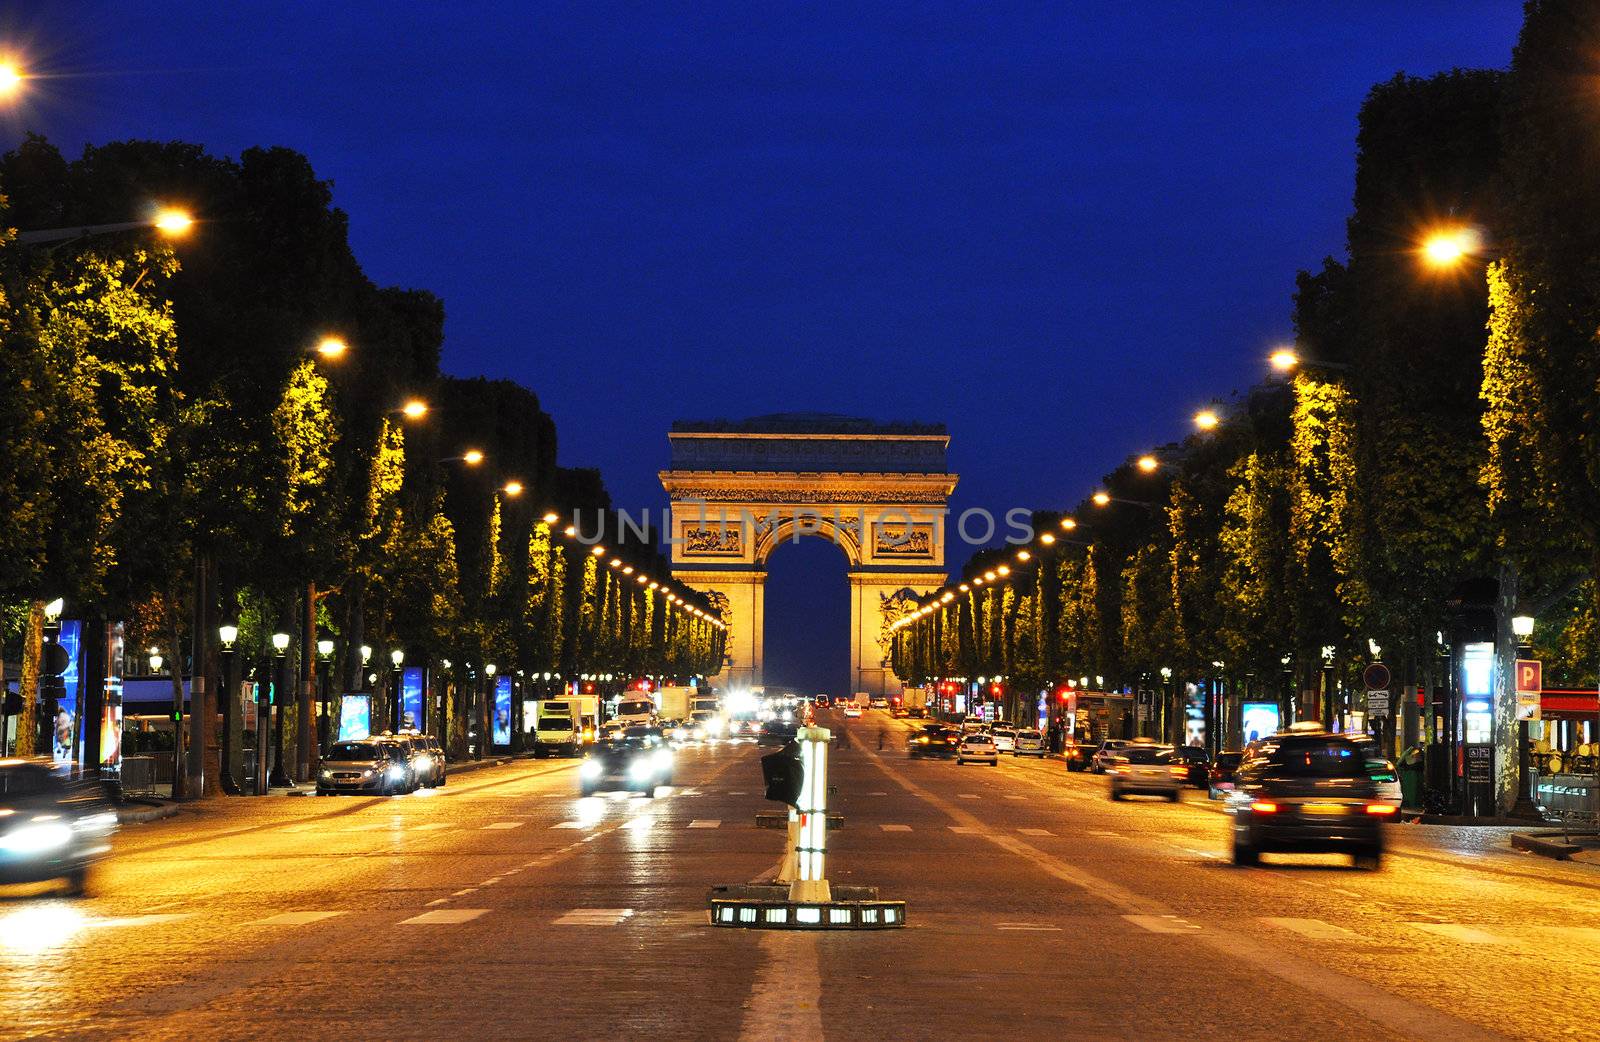 The Champs-Elysees at night, Paris by dutourdumonde